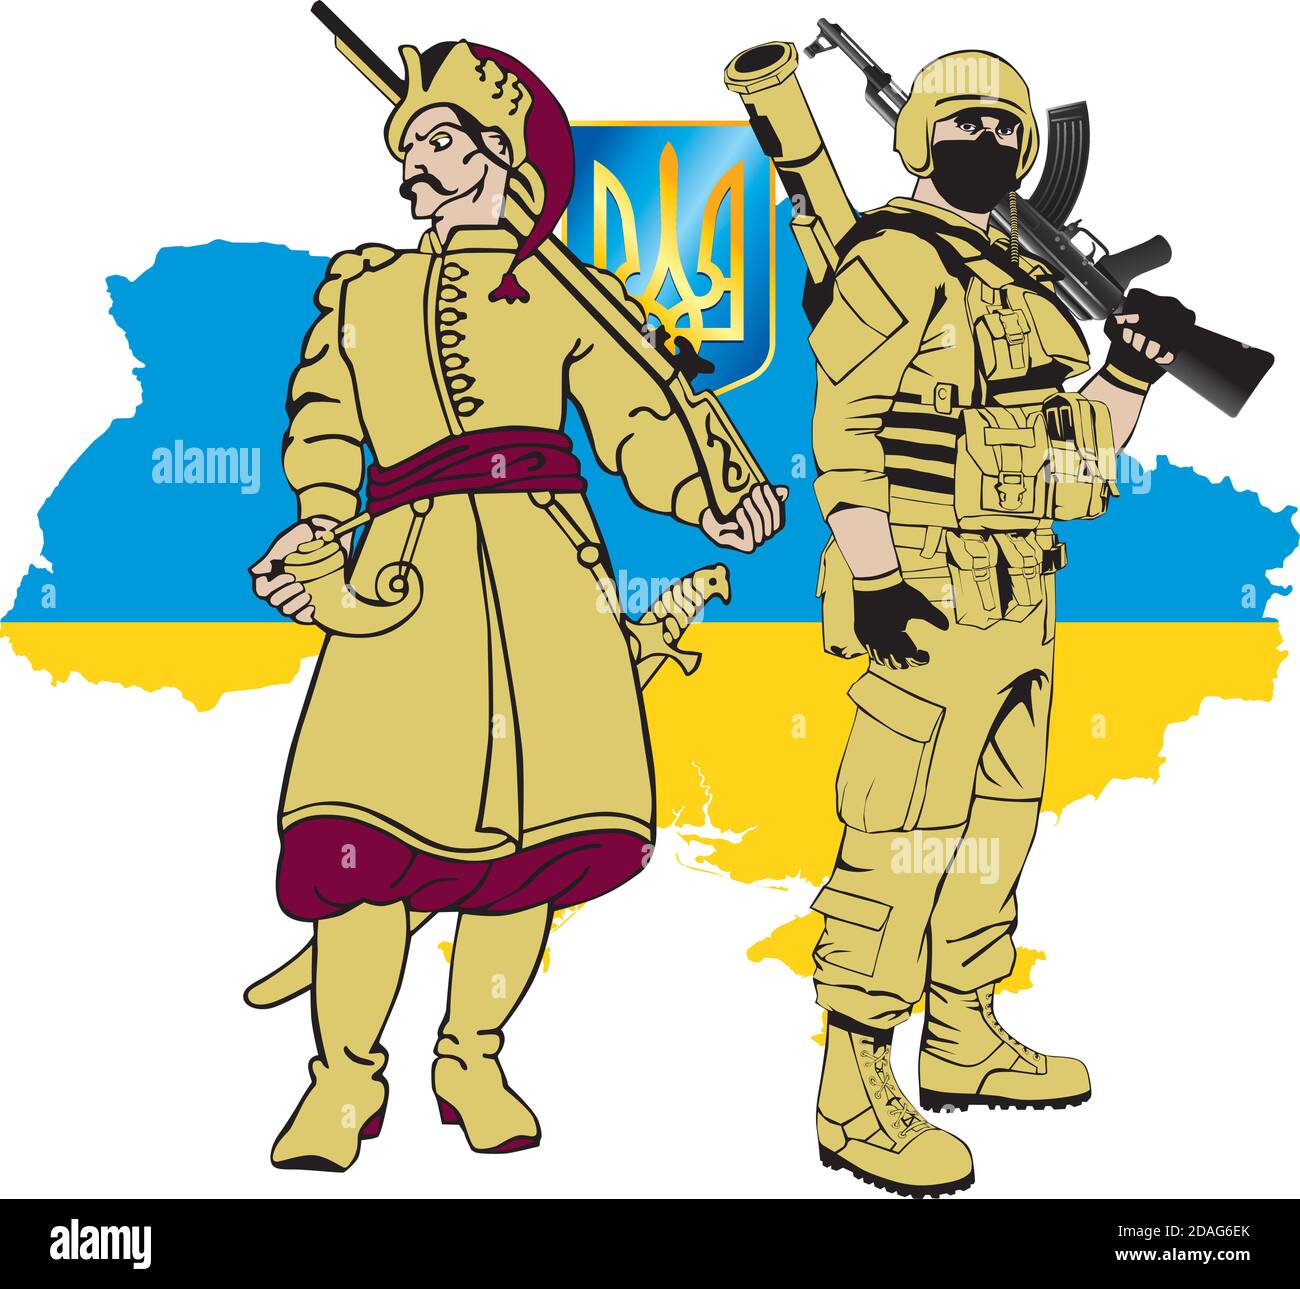 Ukrainian soldiers - Zaporozhye Cossack and a modern soldier against the silhouette of Ukraine Stock Vector